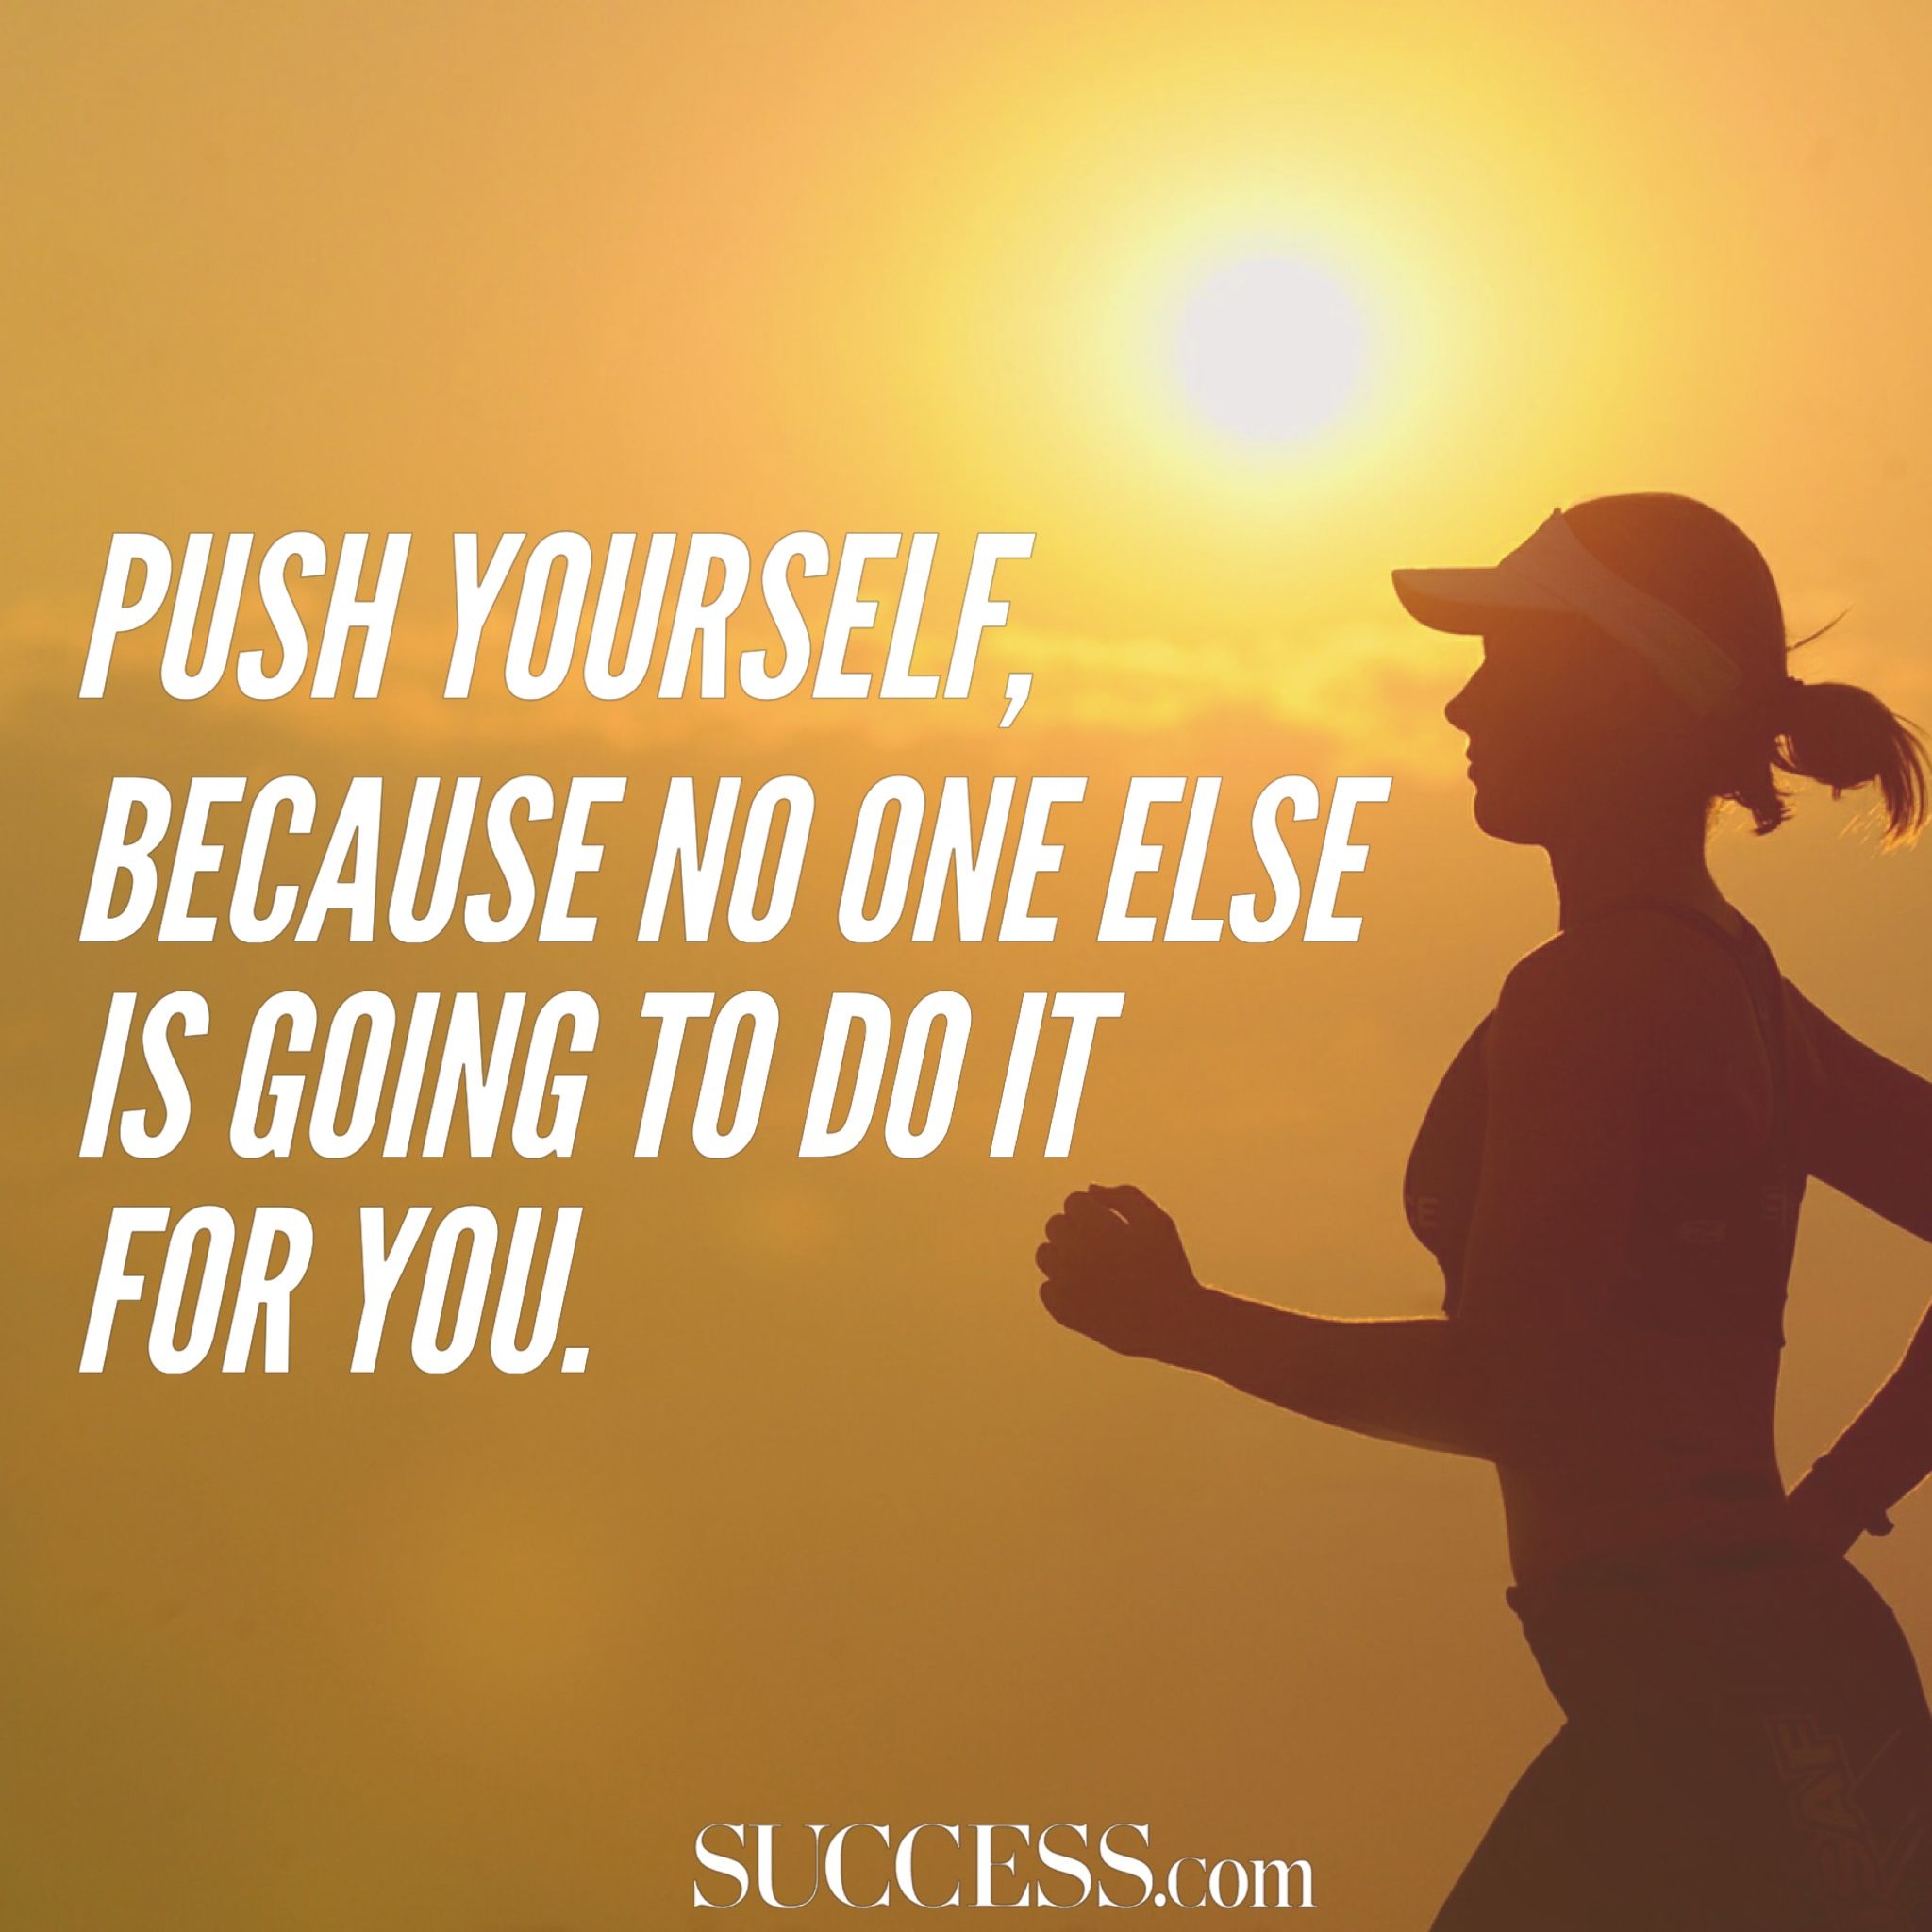 Push yourself, because no one else is going to do it for you. Successful life quotes, Positive quotes success, Success quotes image